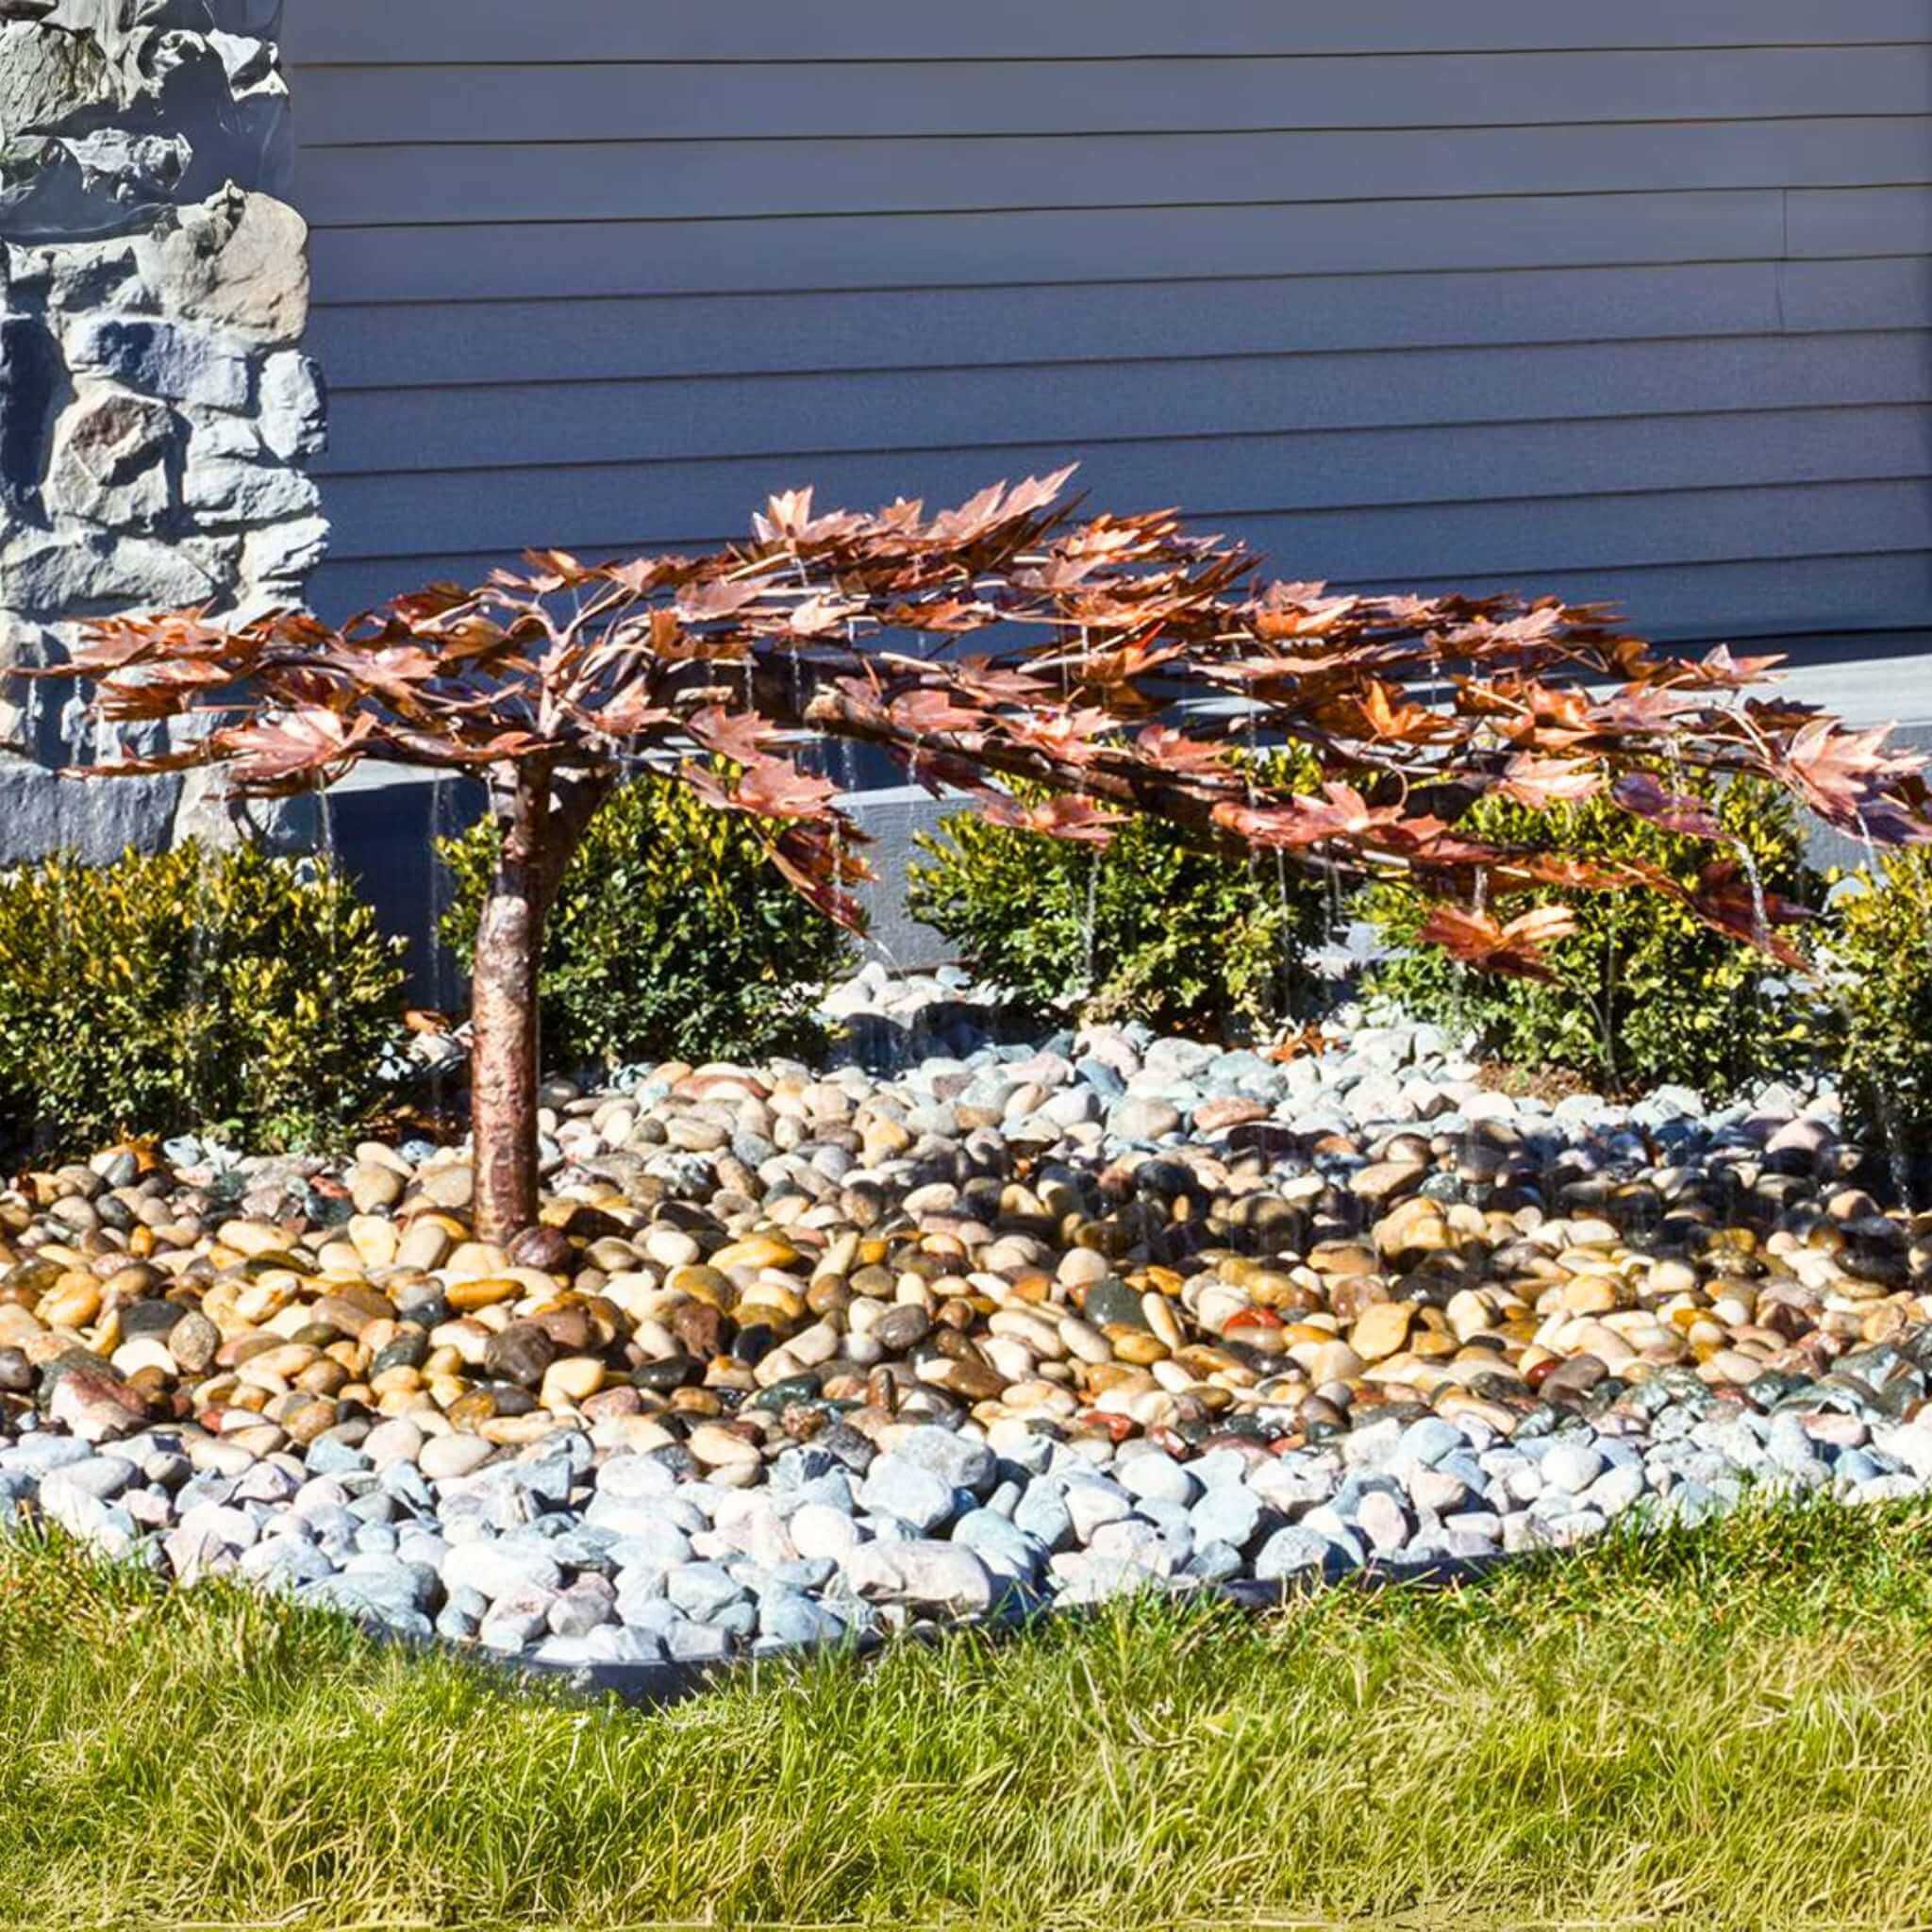 Creeping Japanese Maple Copper Fountain Kit